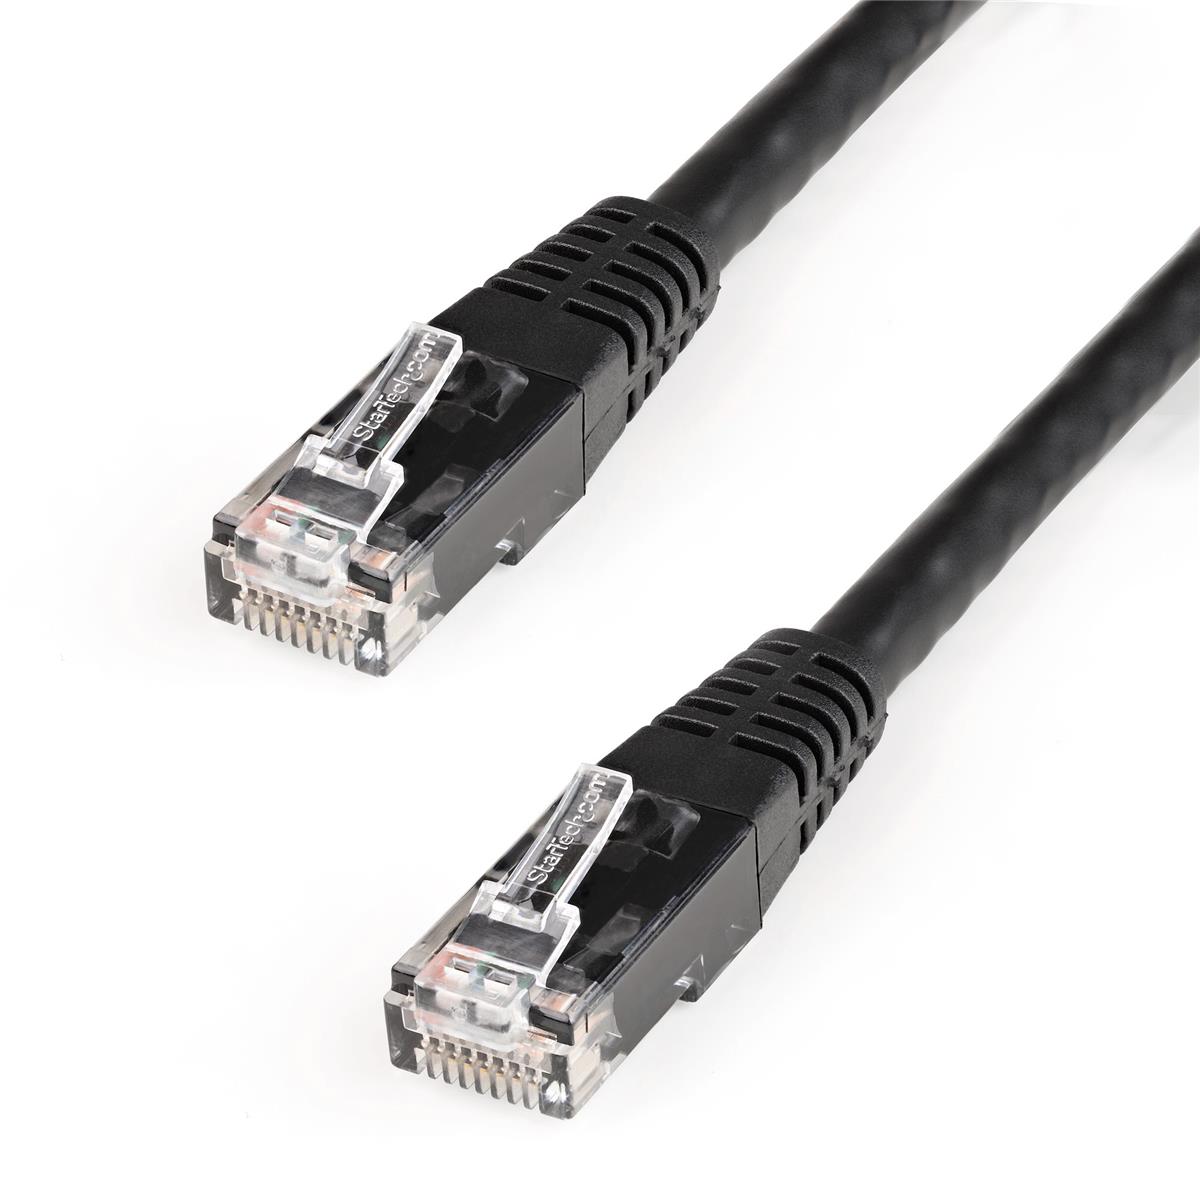 

StarTech 0.5m Cat6 Patch Cable with Snagless RJ45 Connectors, 24 AWG